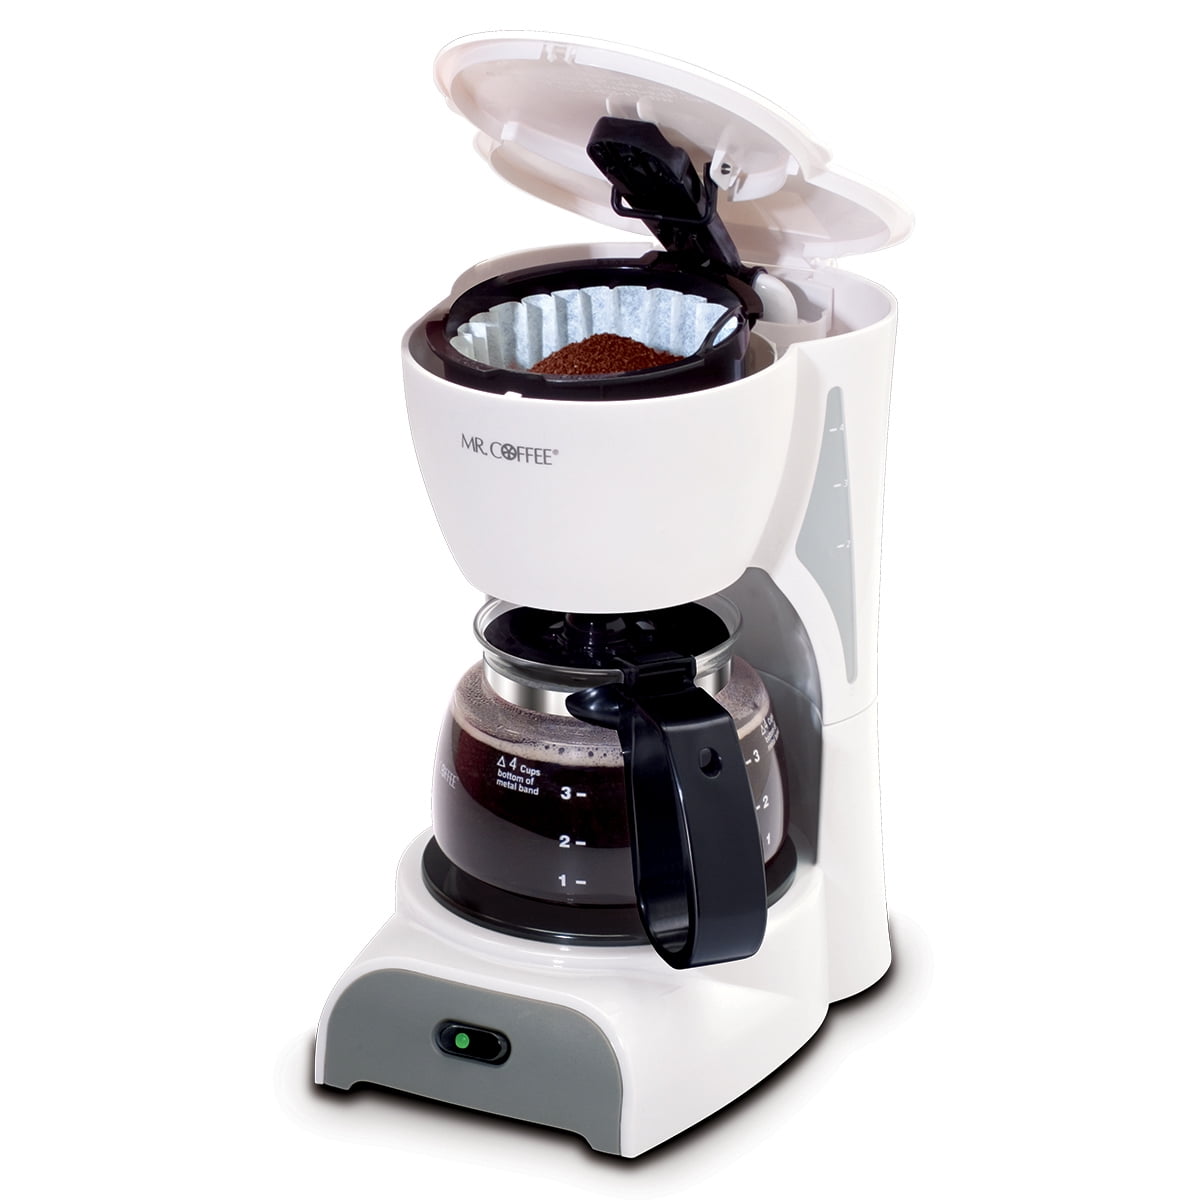  Mr. Coffee 4-Cup Coffee Maker, White - DR4-RB: Drip